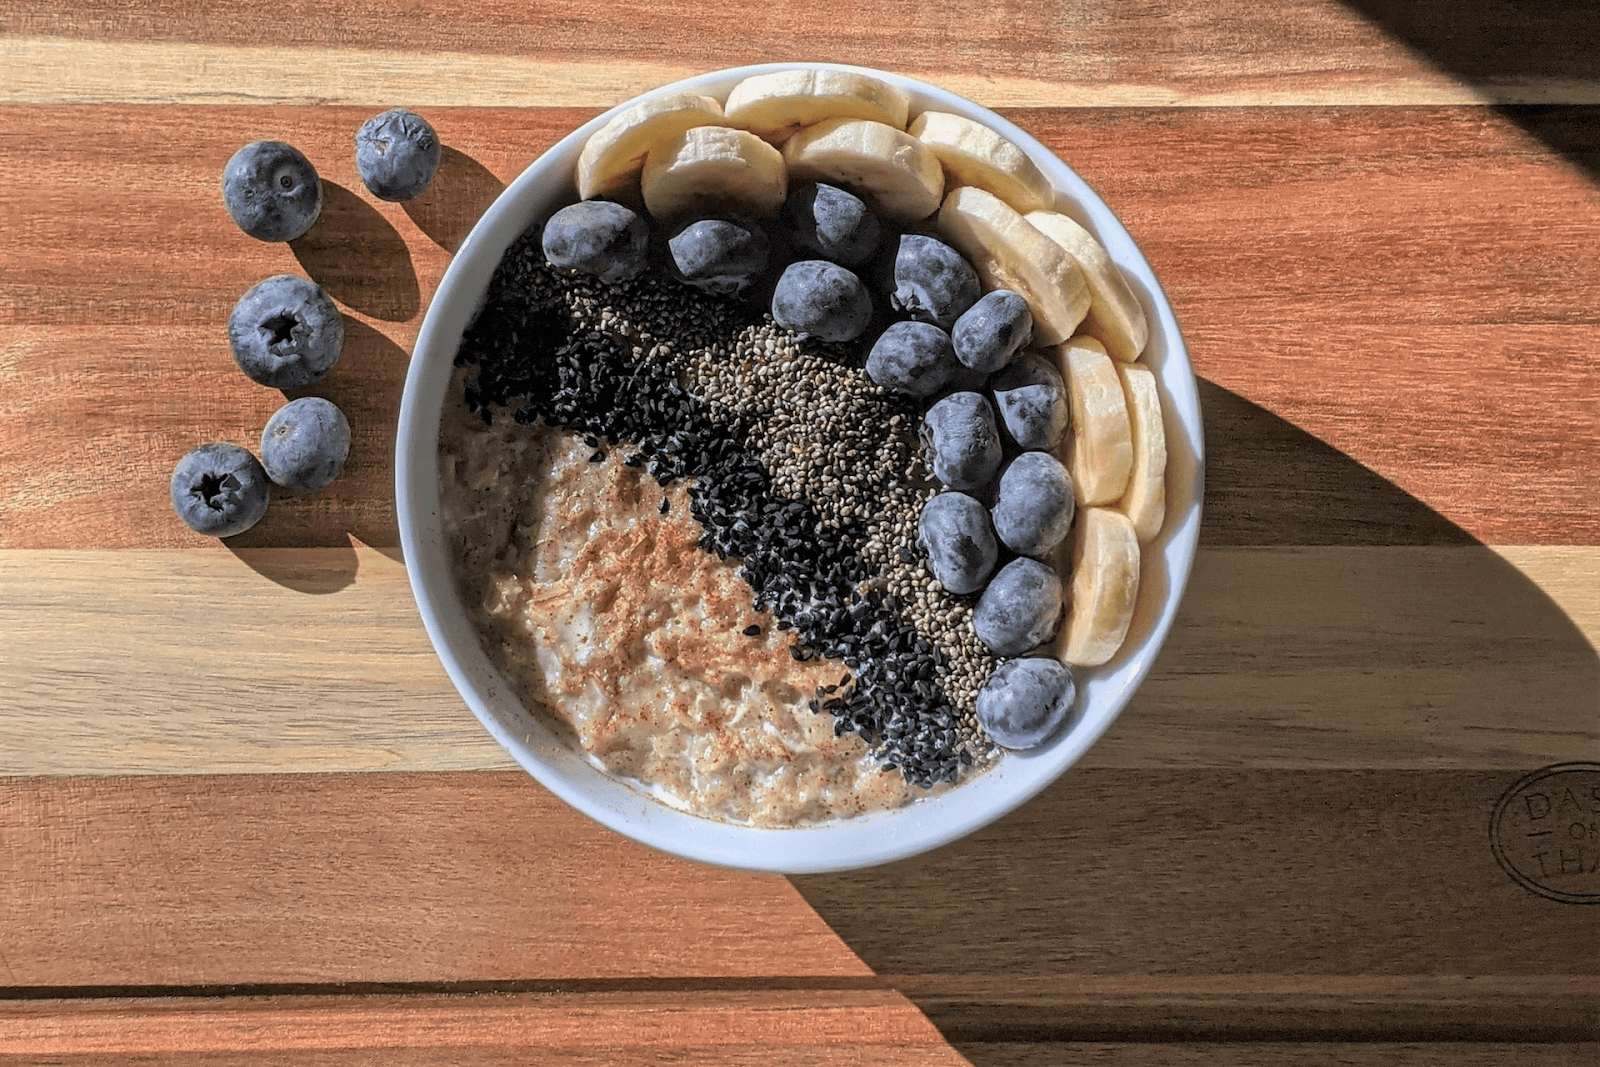 benefits of chia seeds - a breakfast bowl of chia seeds with banana and blueberries